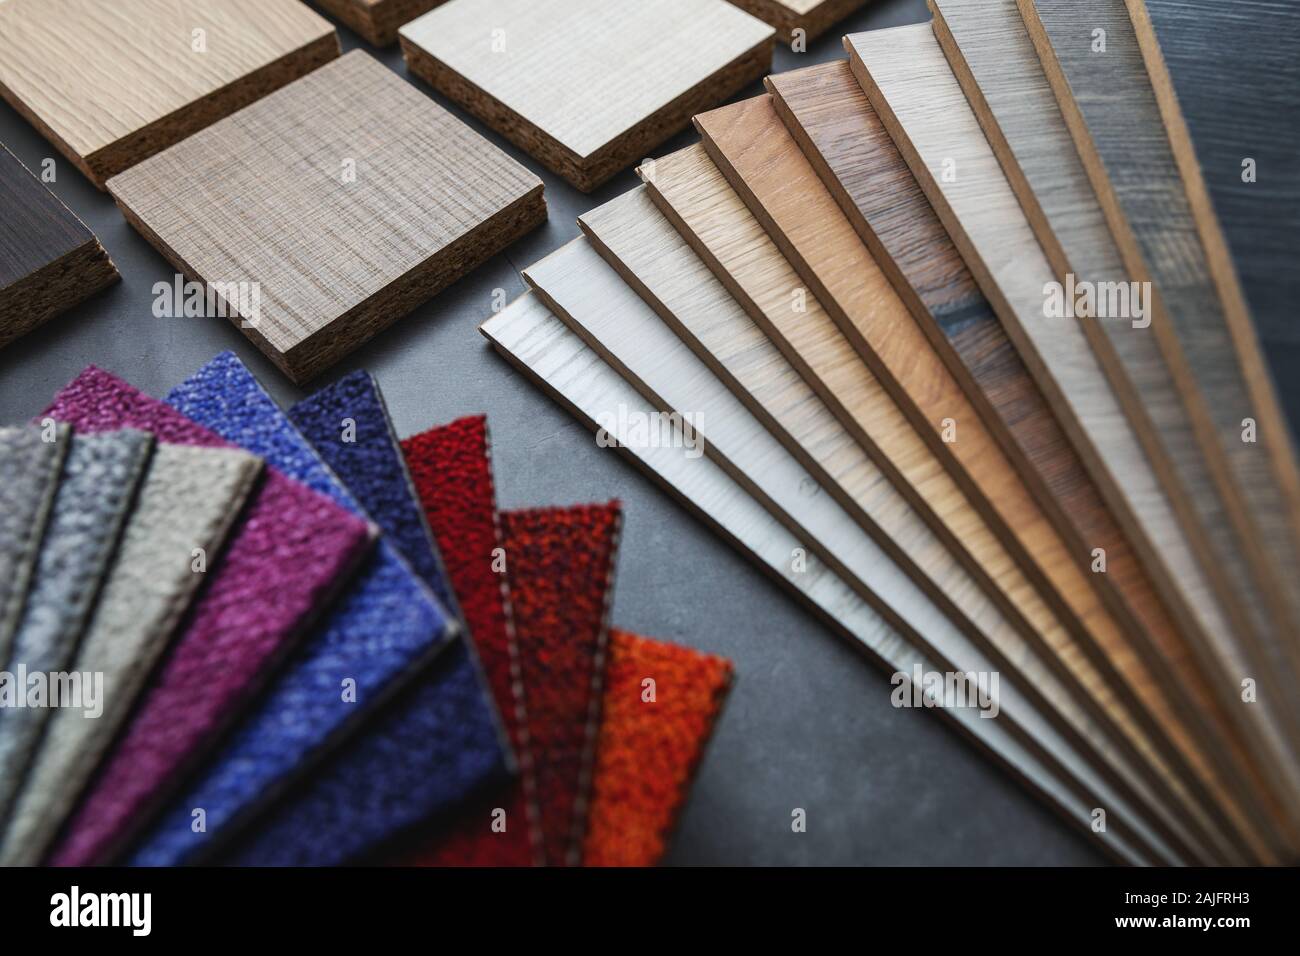 flooring and furniture material samples for interior design project Stock Photo